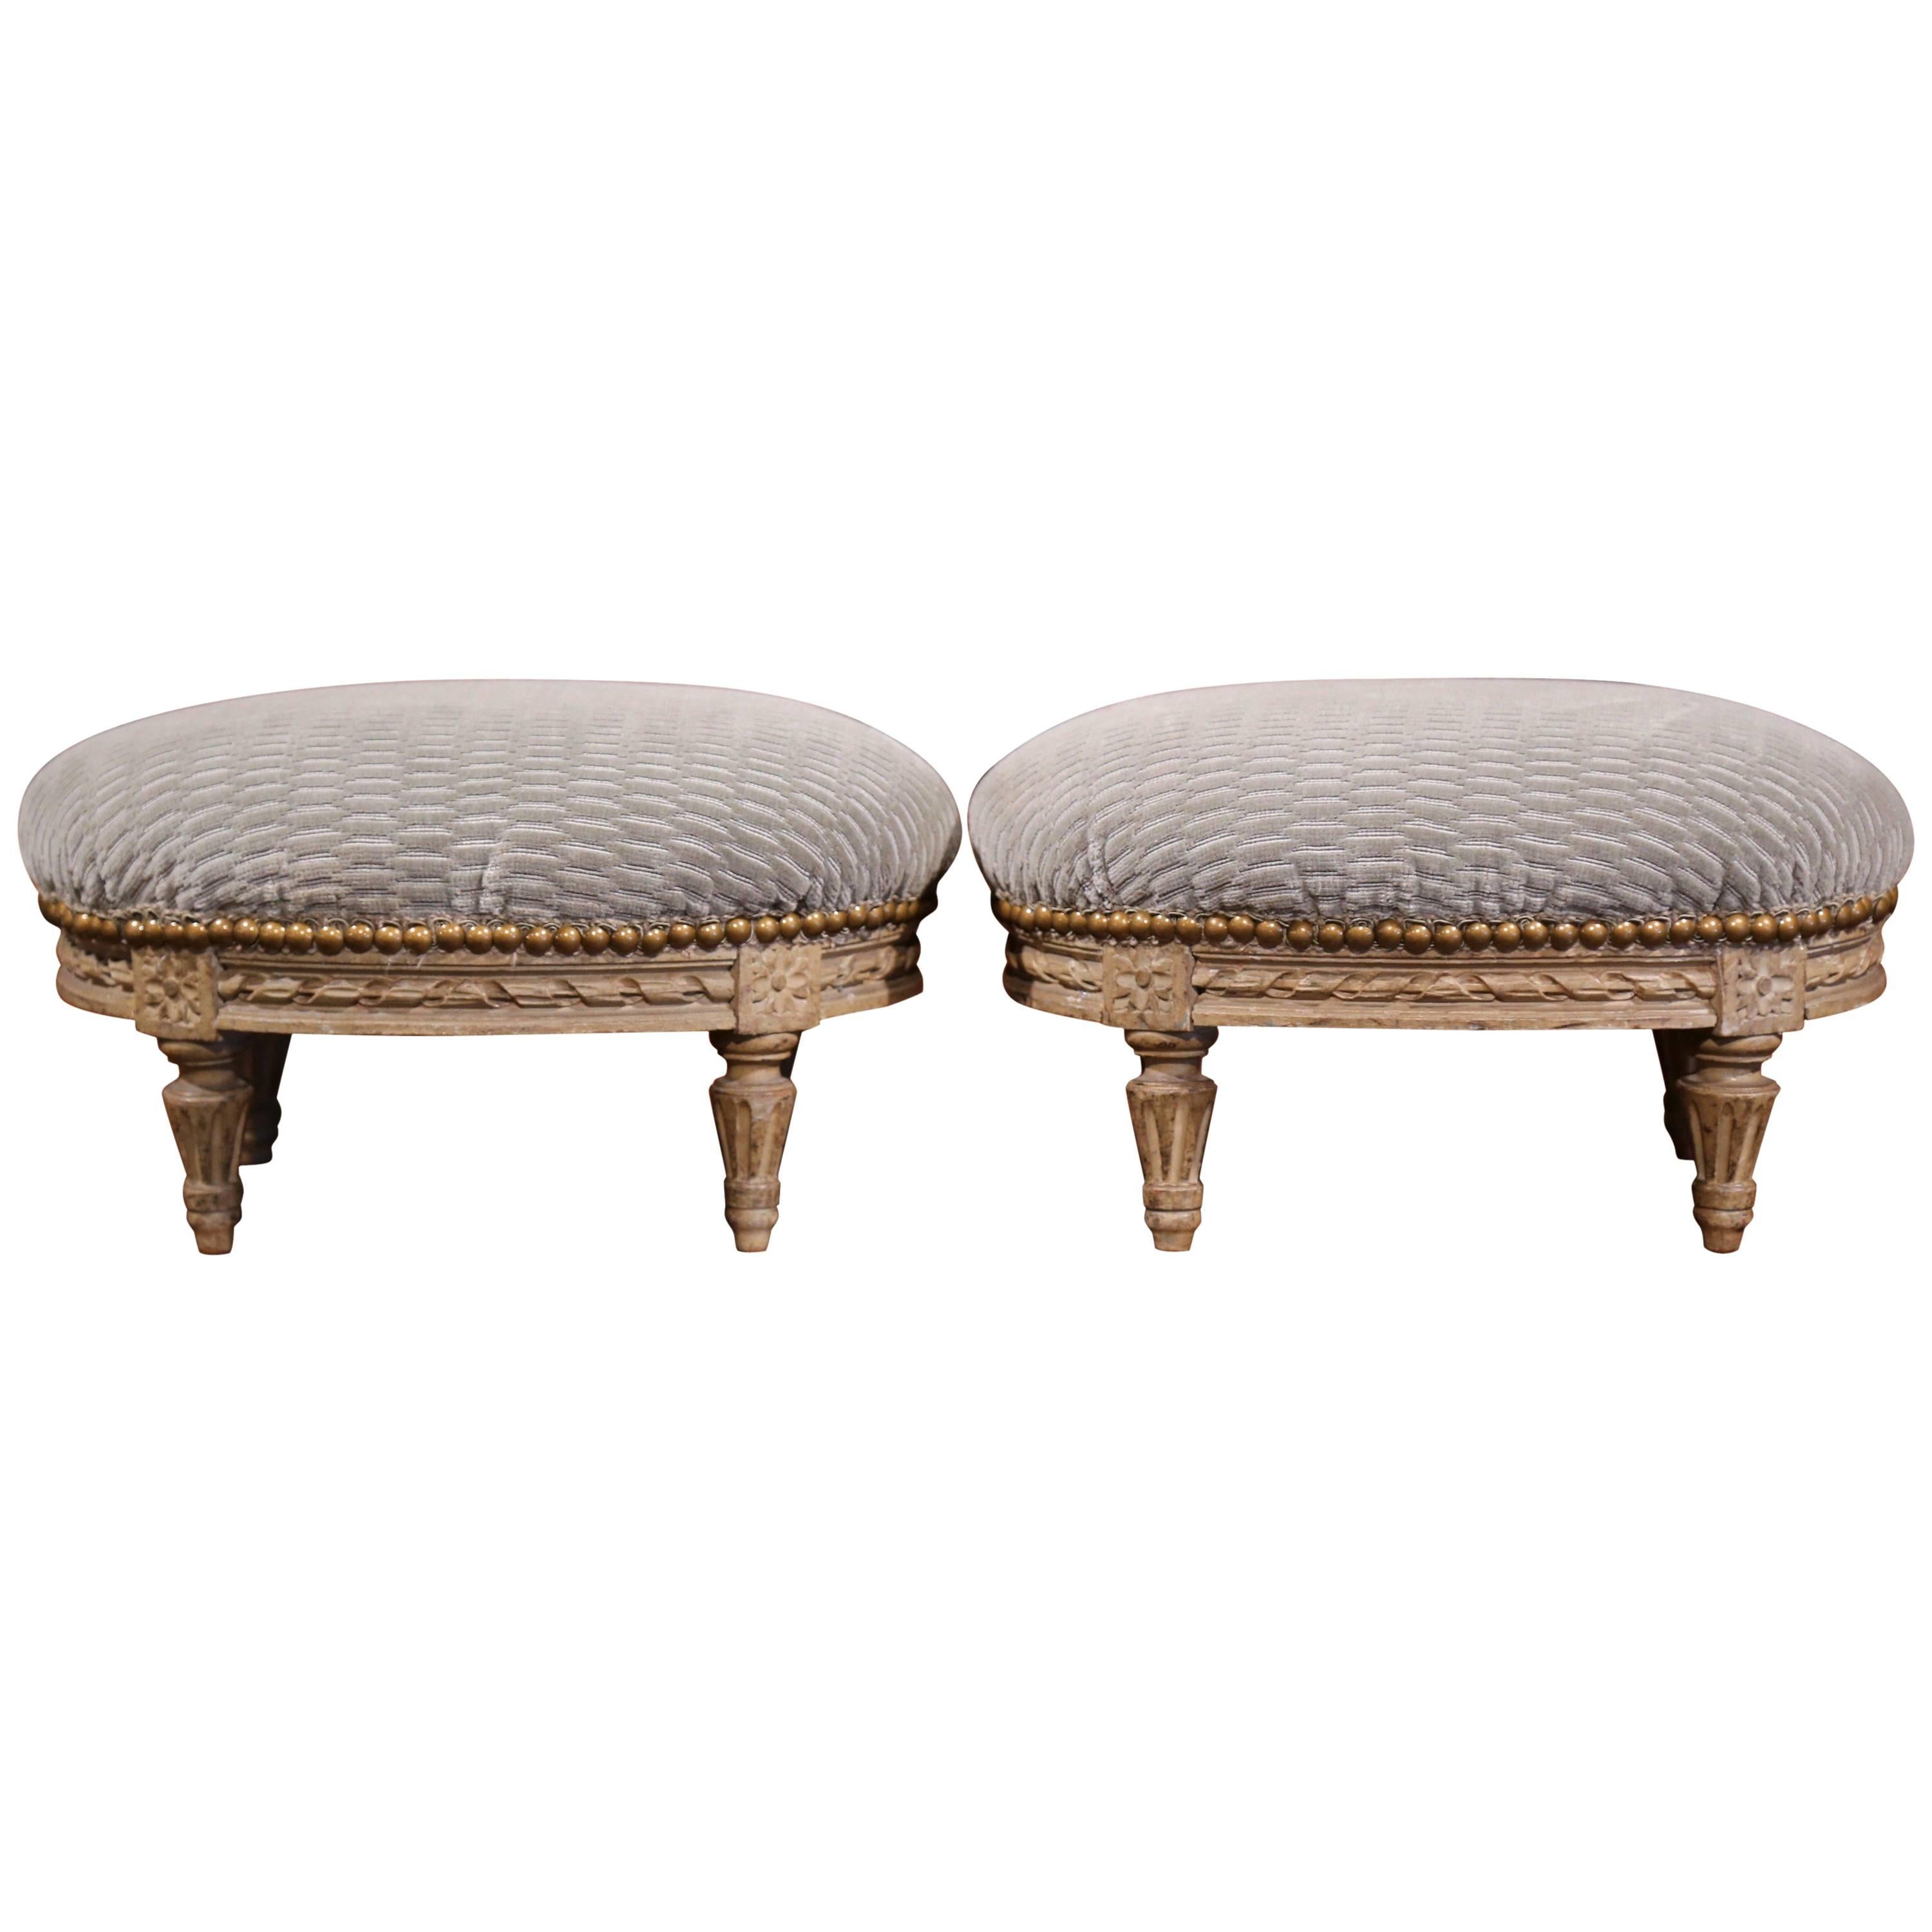 Pair of French Louis XVI Carved Painted Oval Footstools with Blue Velvet Fabric